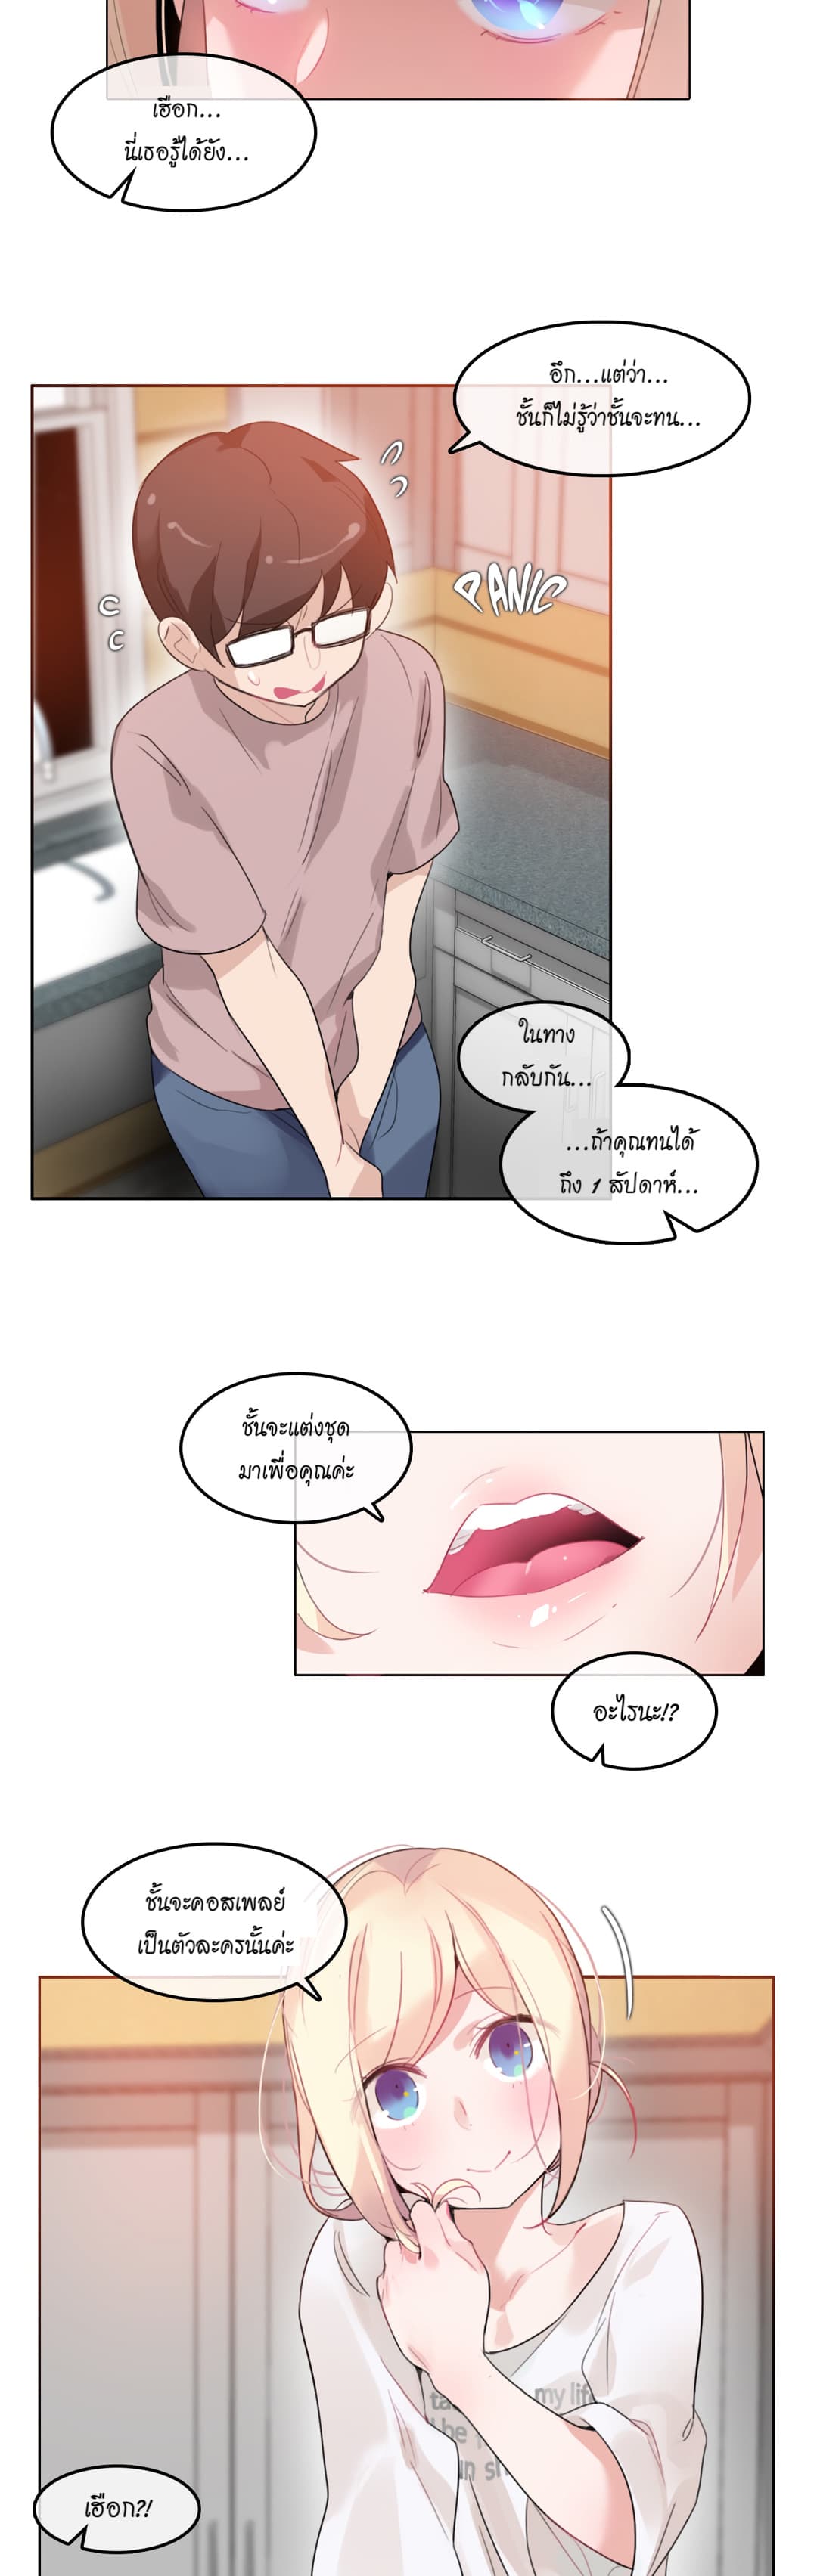 A Pervert’s Daily Life 37 (21)